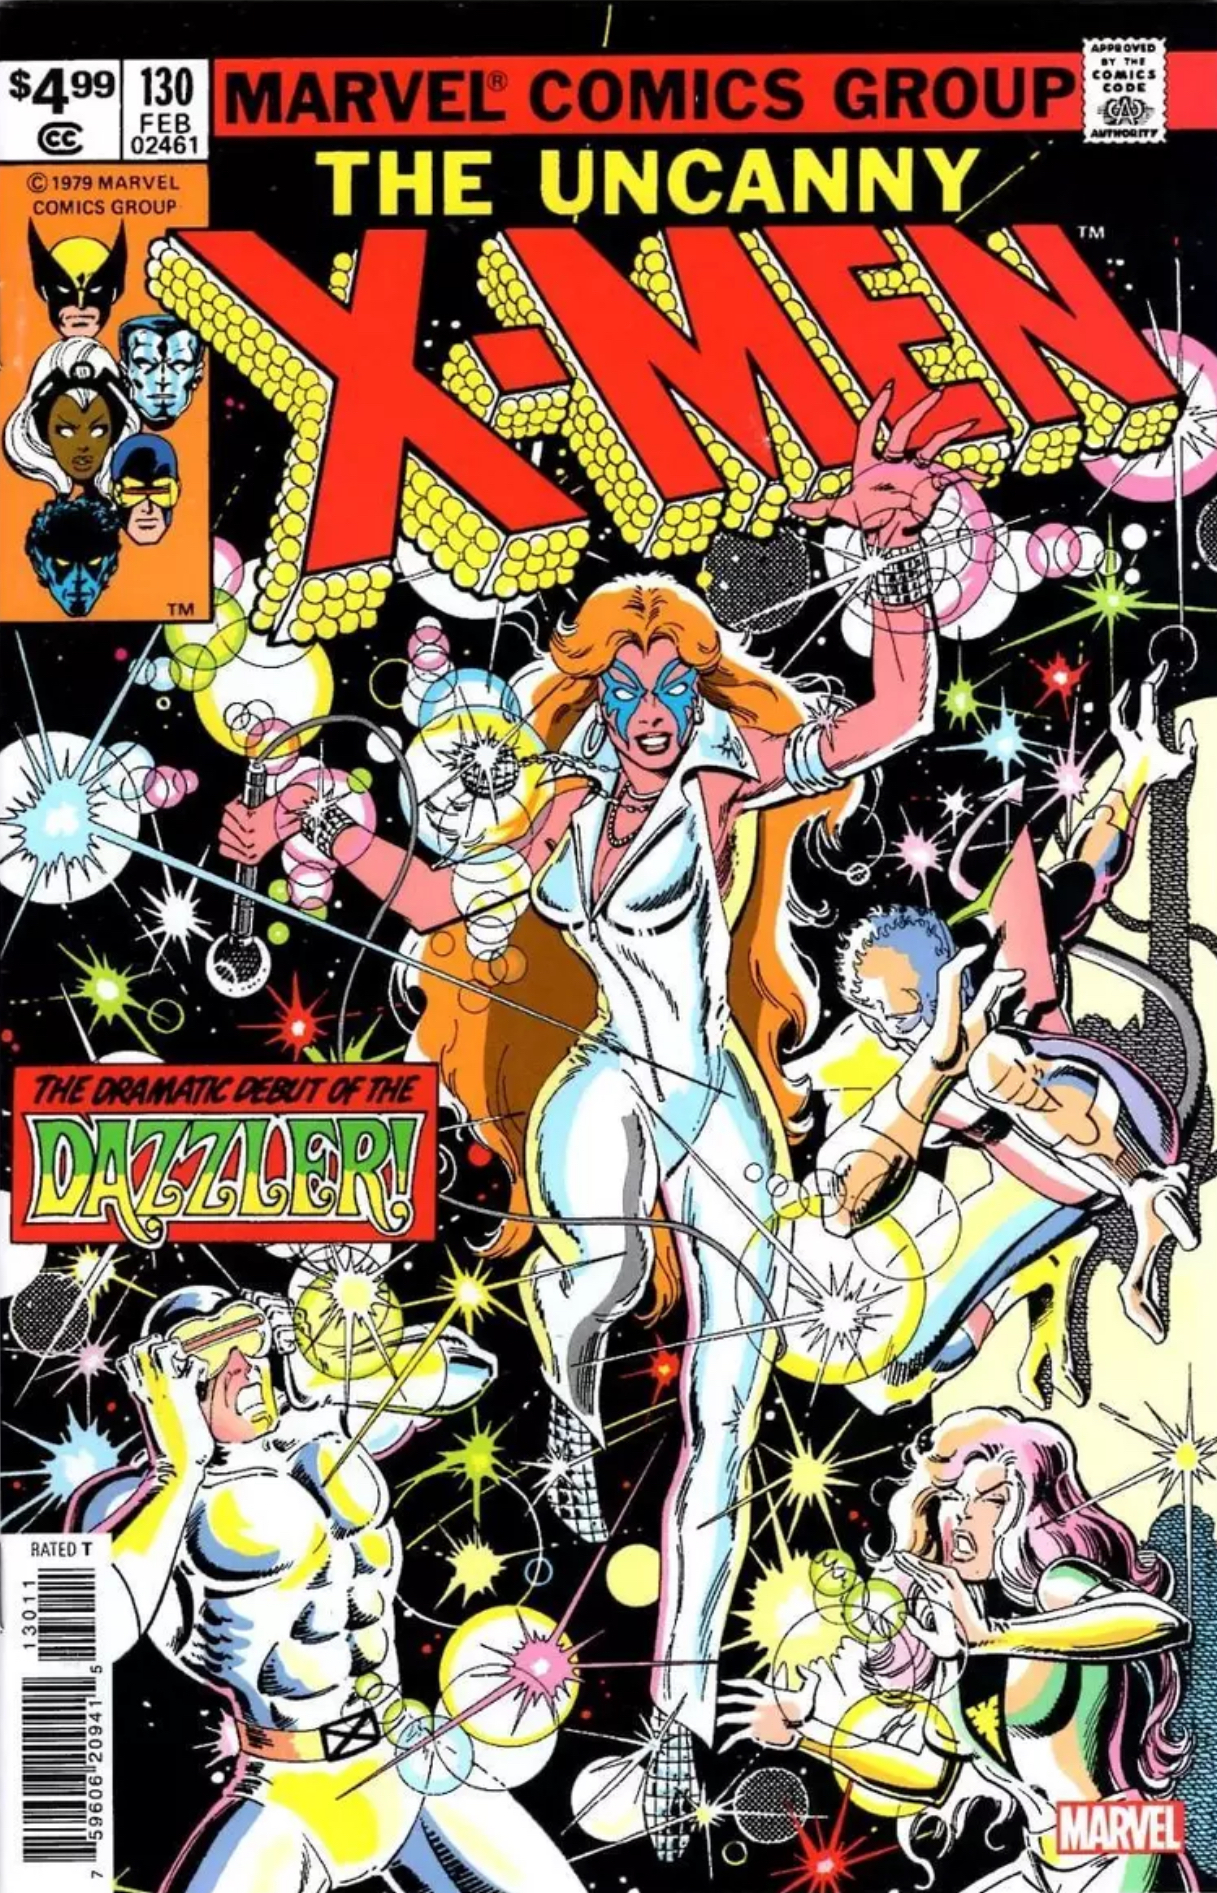 The Dramatic Debut of the Dazzler!